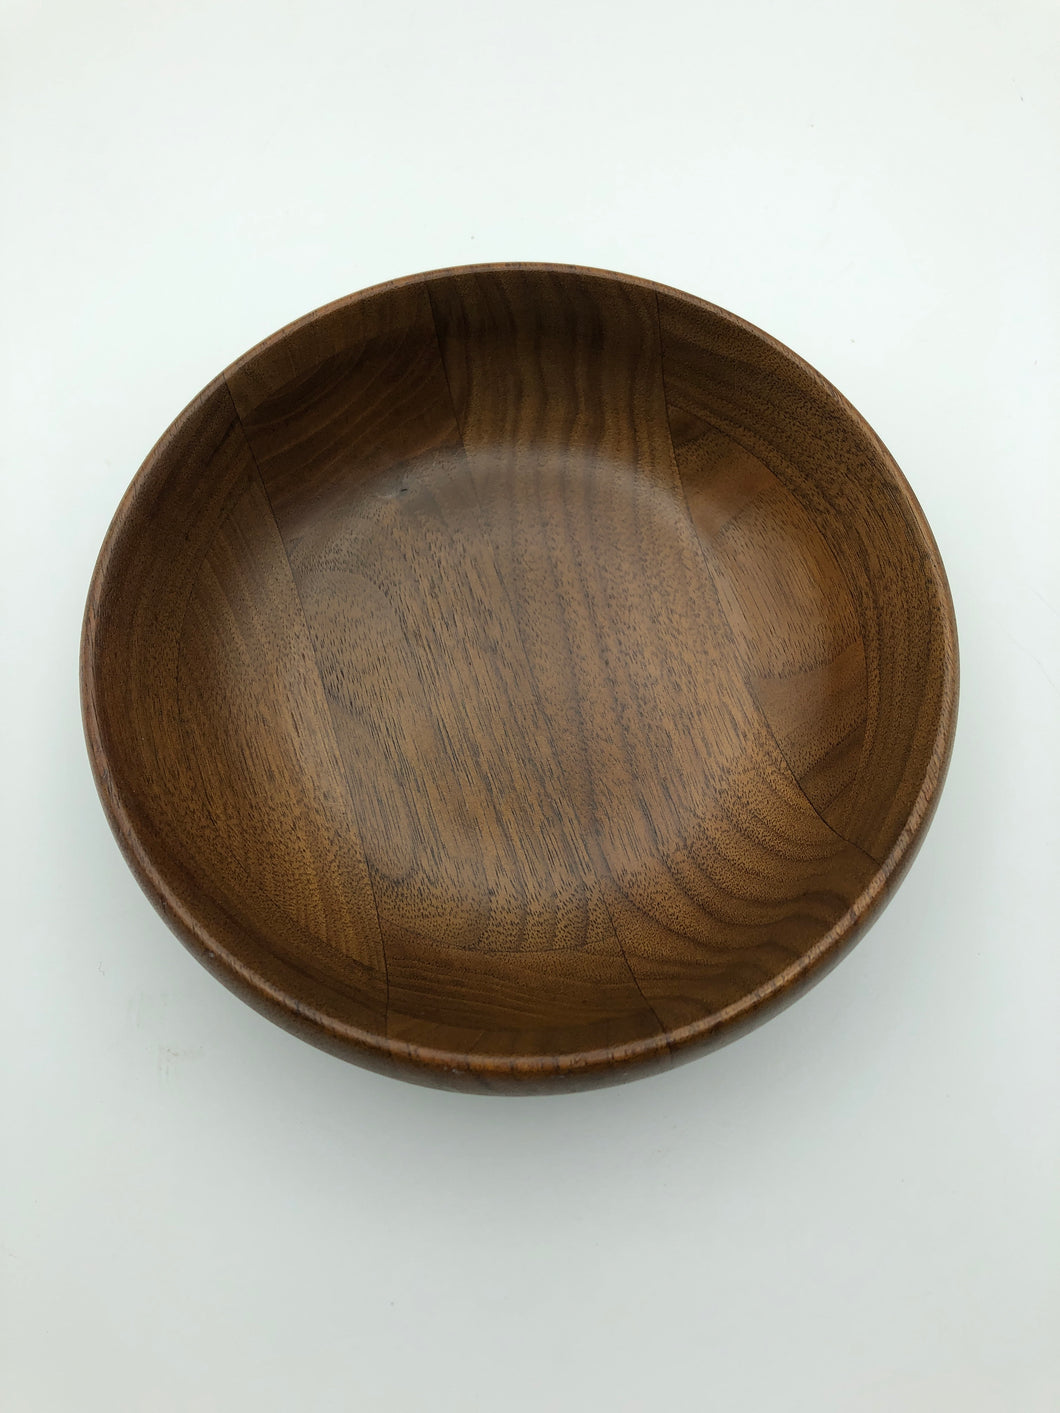 Small Wooden Solid American Walnut bowl 6